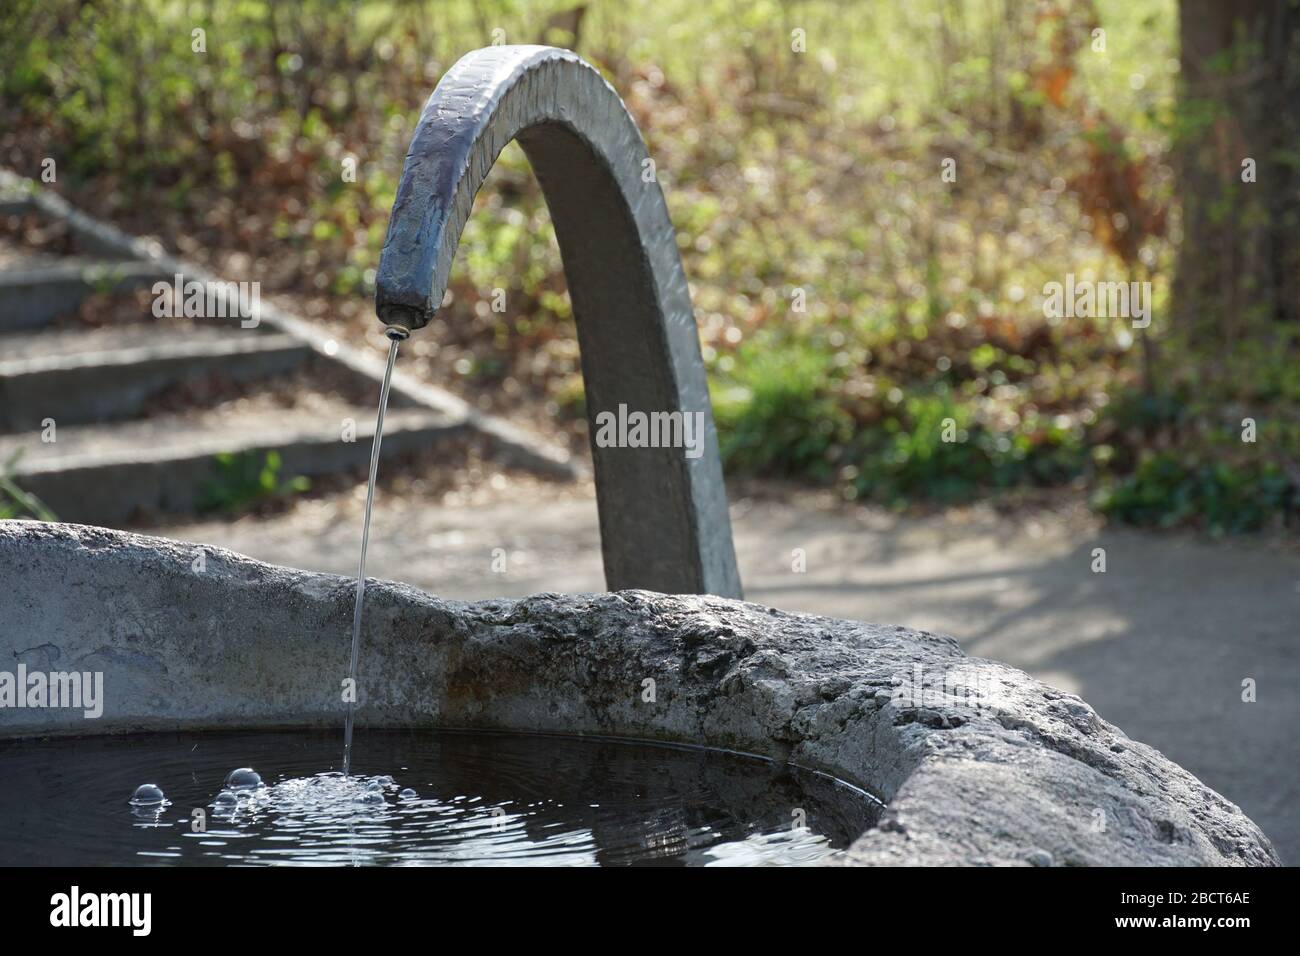 A small drinking well of stone and metal, a source of drinking water accessible for free to everyone in public place Stock Photo